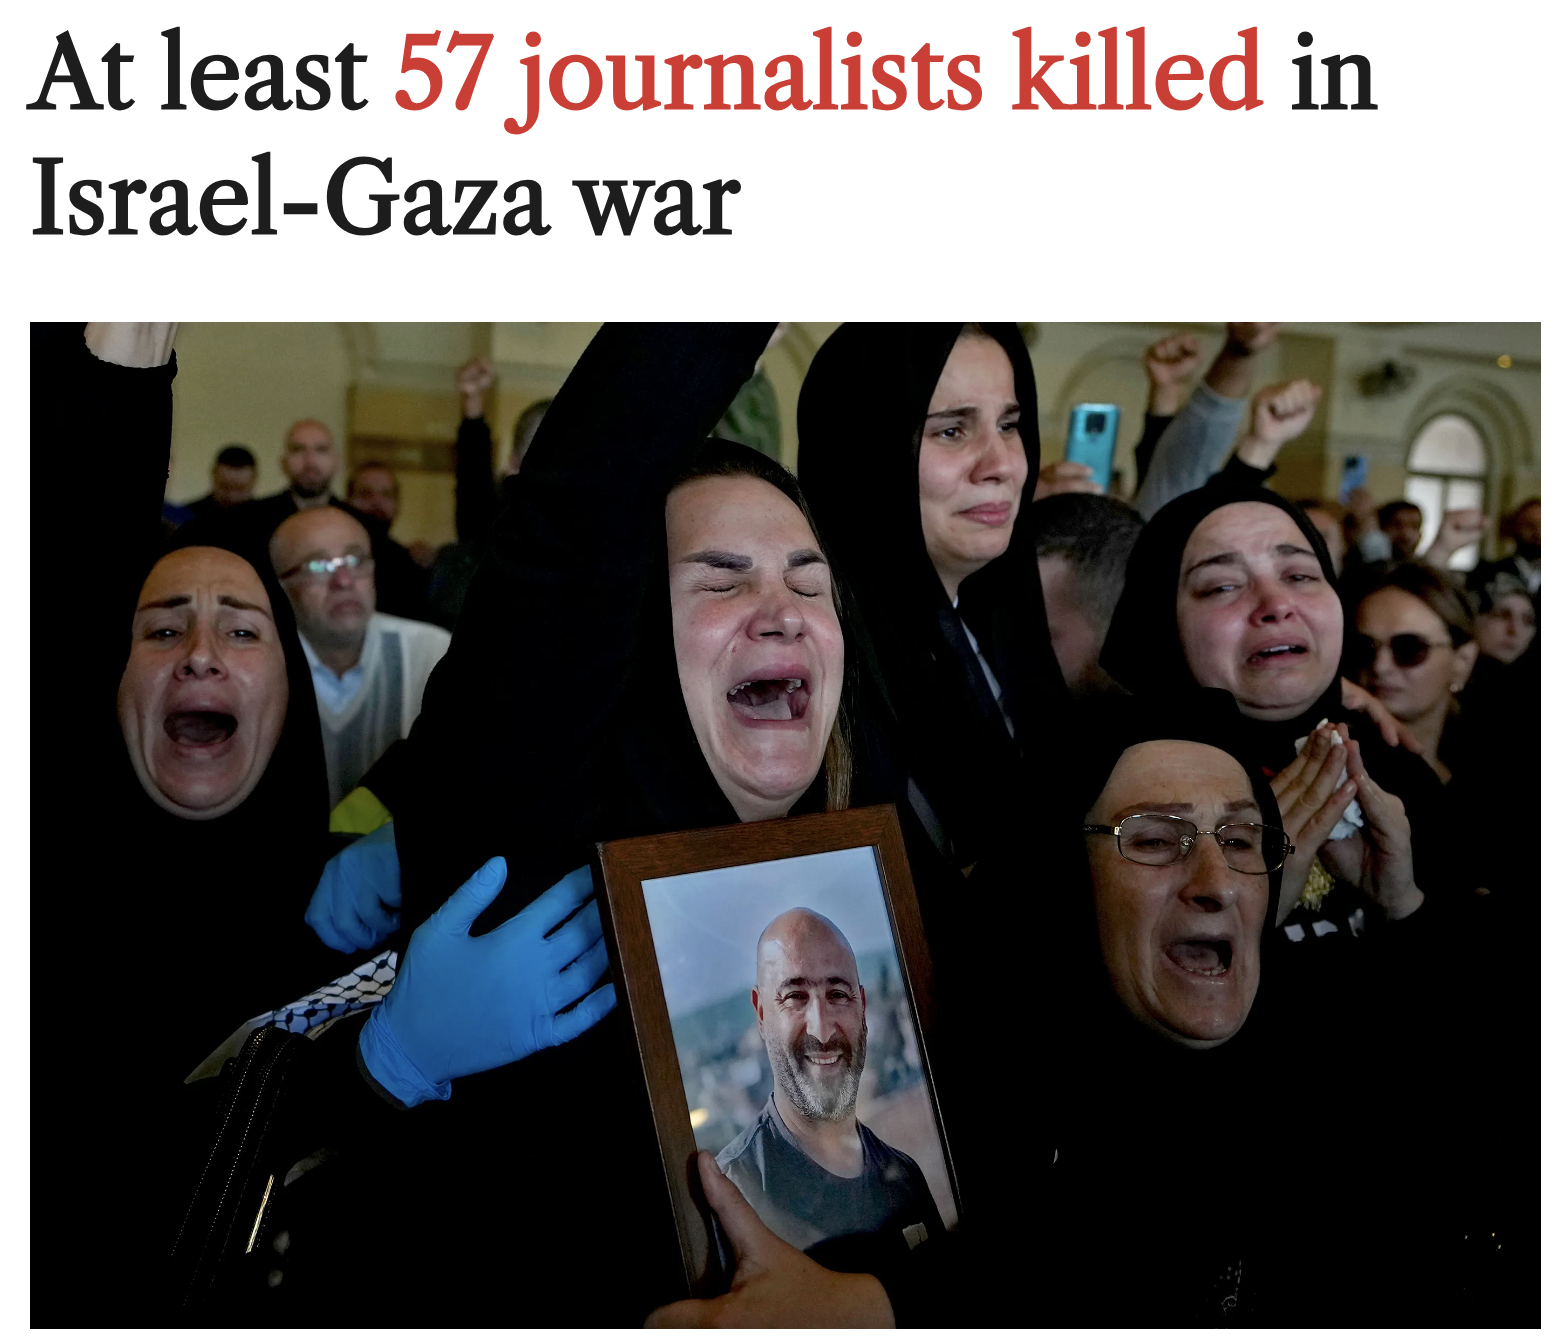 The Committee to Protect Journalists reports at least 57 journalists have been killed in the war between Israel and Gaza